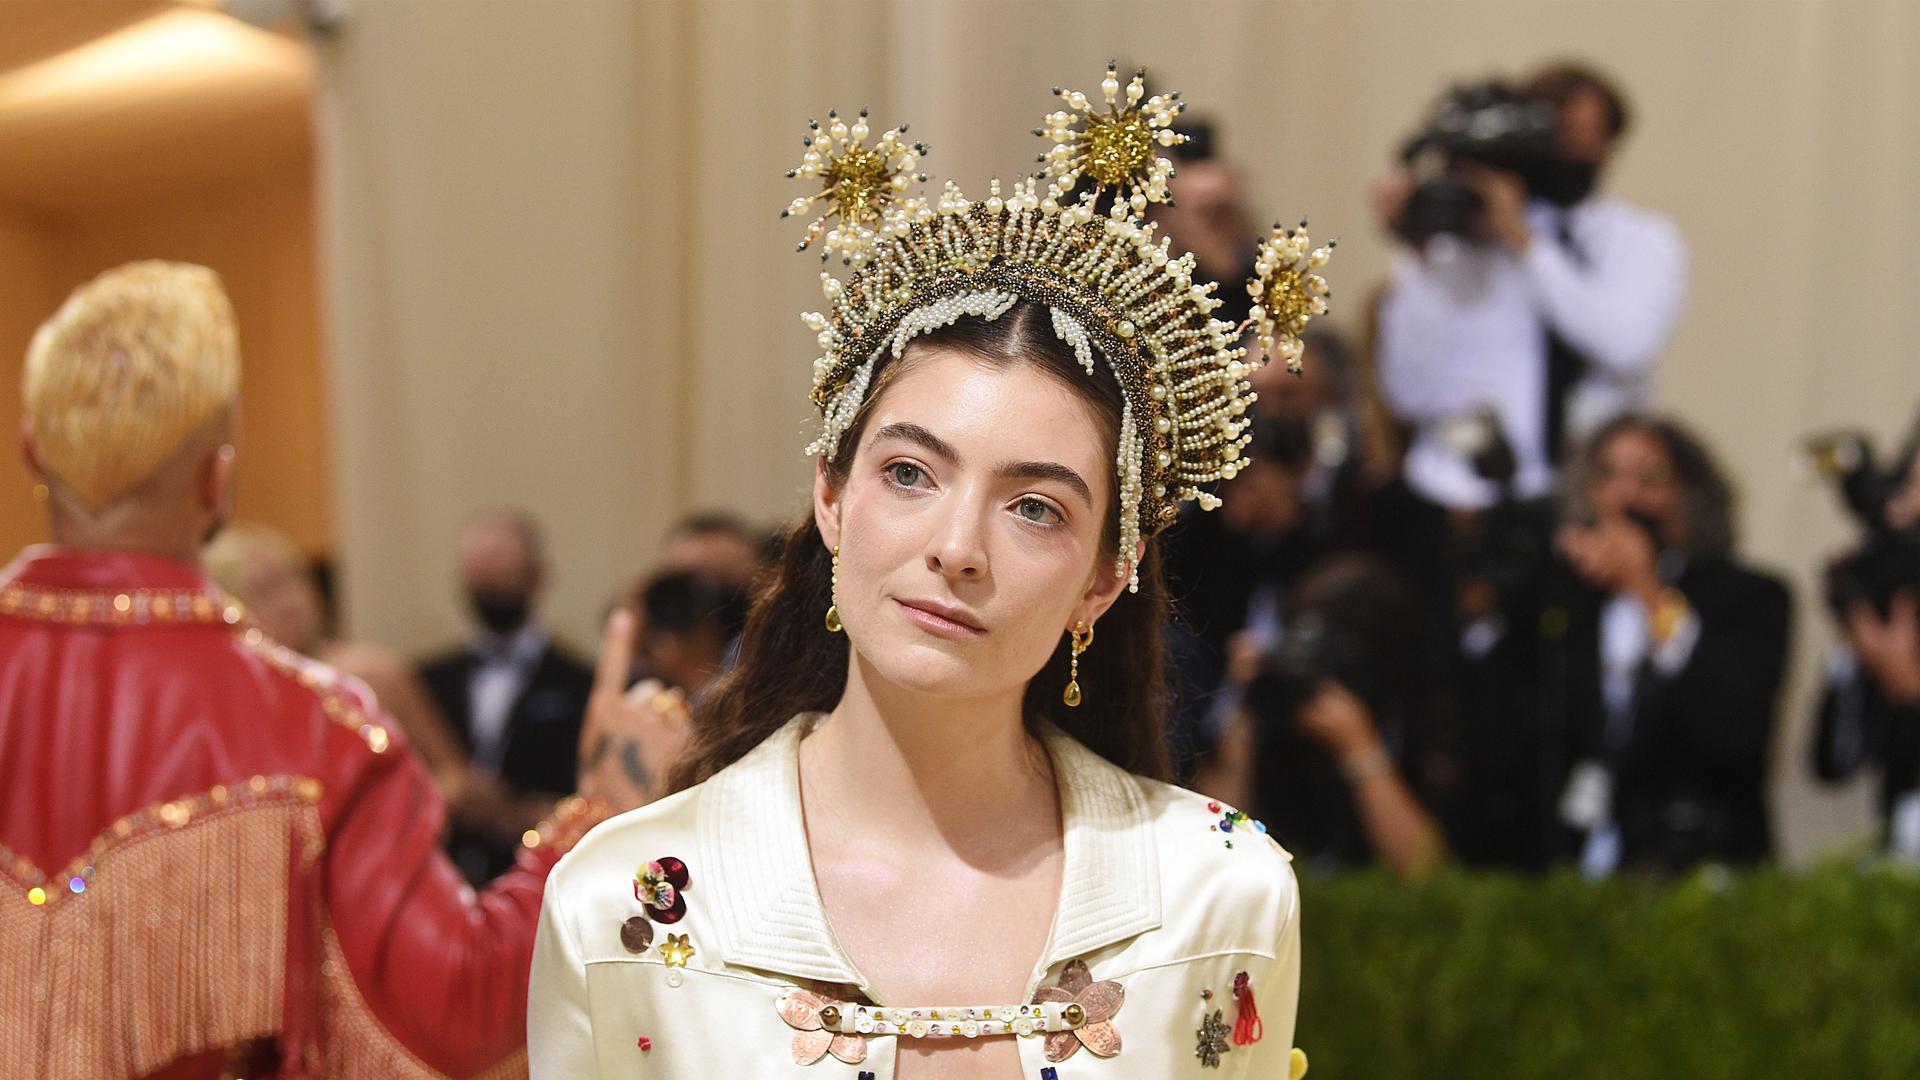 New Zealand singer and songwriter Lorde attends The Metropolitan Museum of Art's Costume Institute benefit gala celebrating the opening of the "In America: A Lexicon of Fashion" exhibition on Sept. 13, 2021, in New York City.